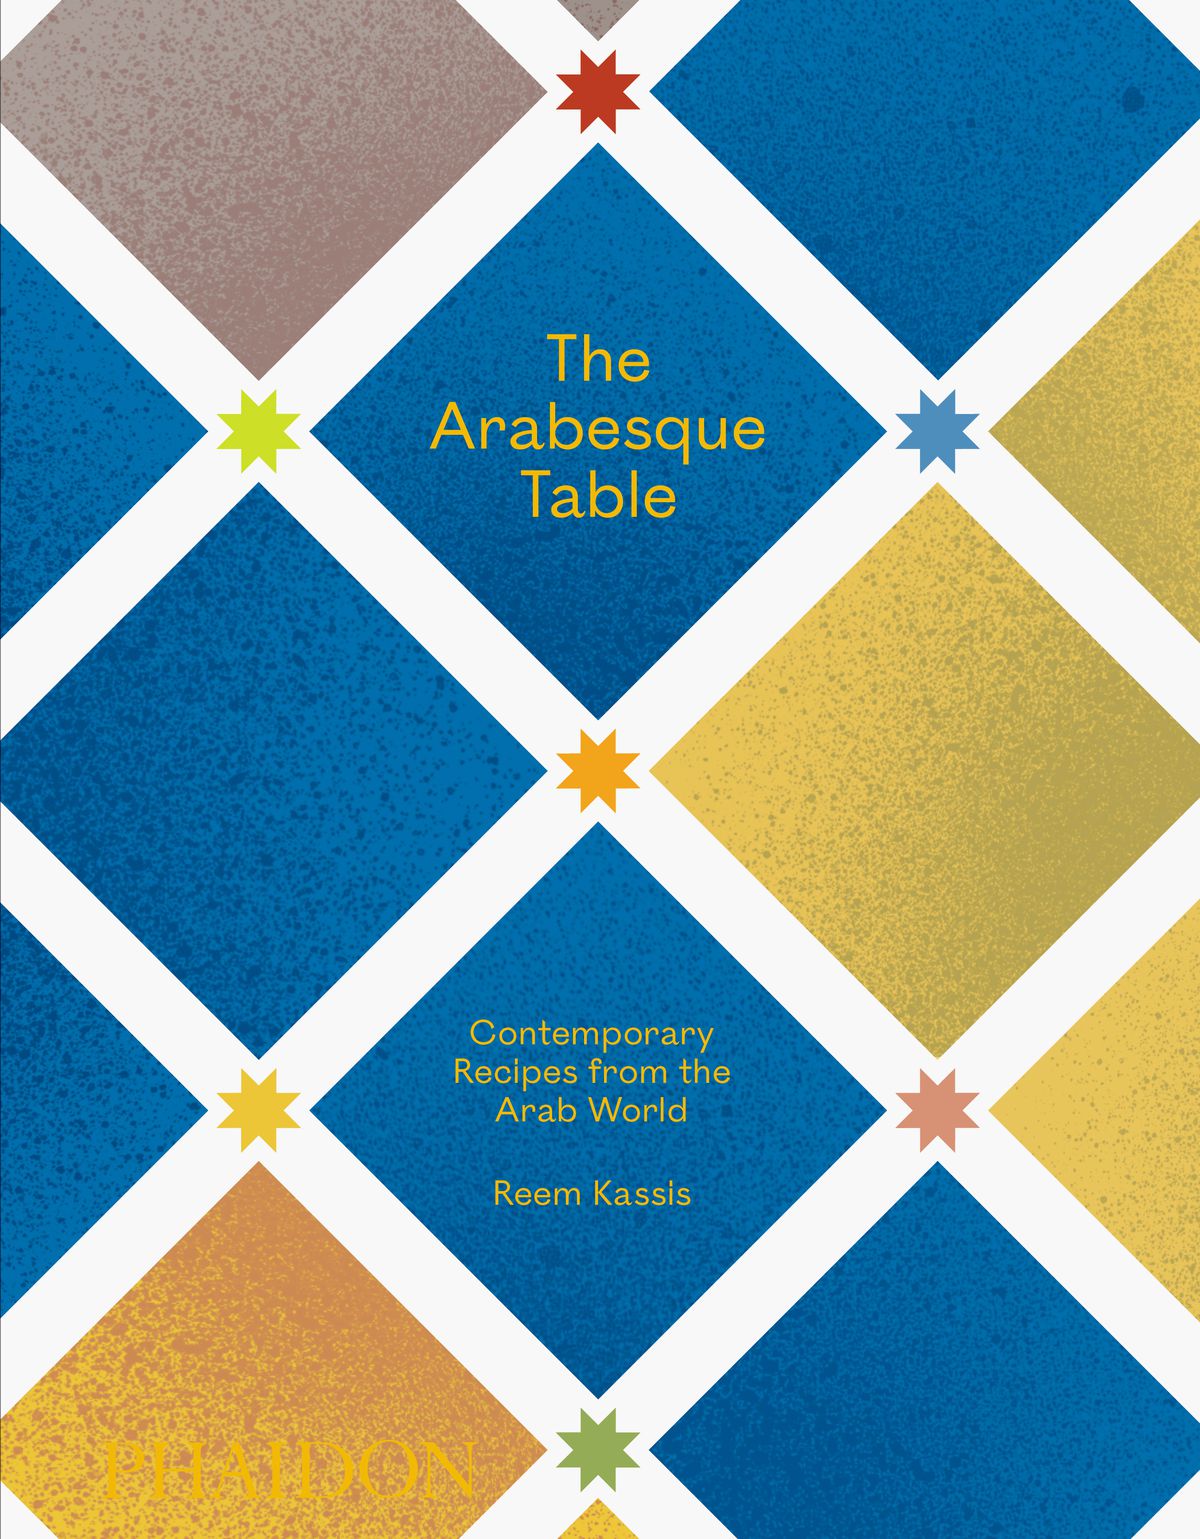 A book cover with a geometric patterned design